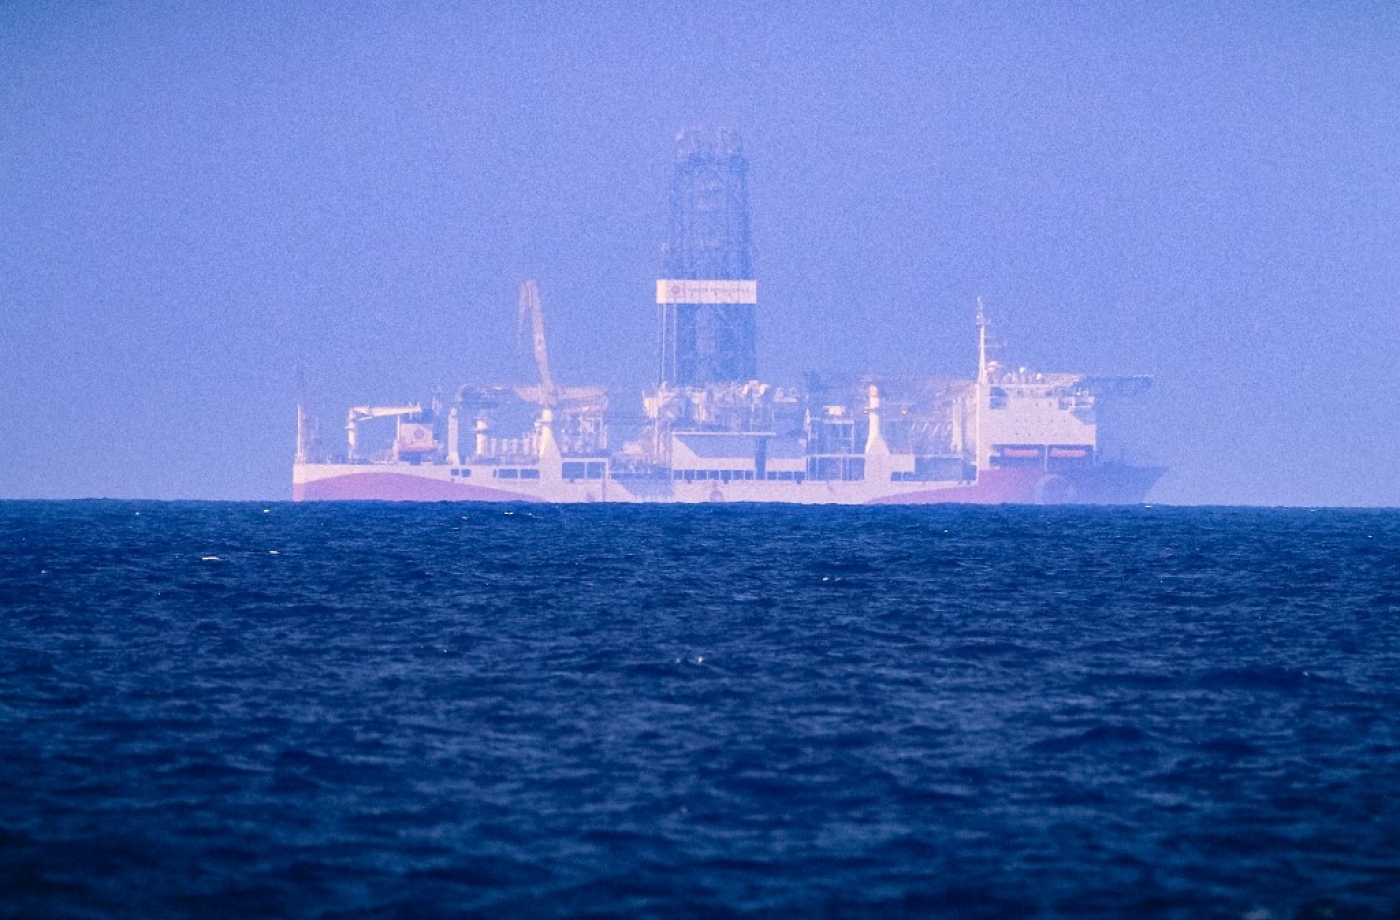 Turkey's drilling vessel, Fatih, was deployed to search for gas and oil in waters considered part of Cyprus' exclusive economic zone